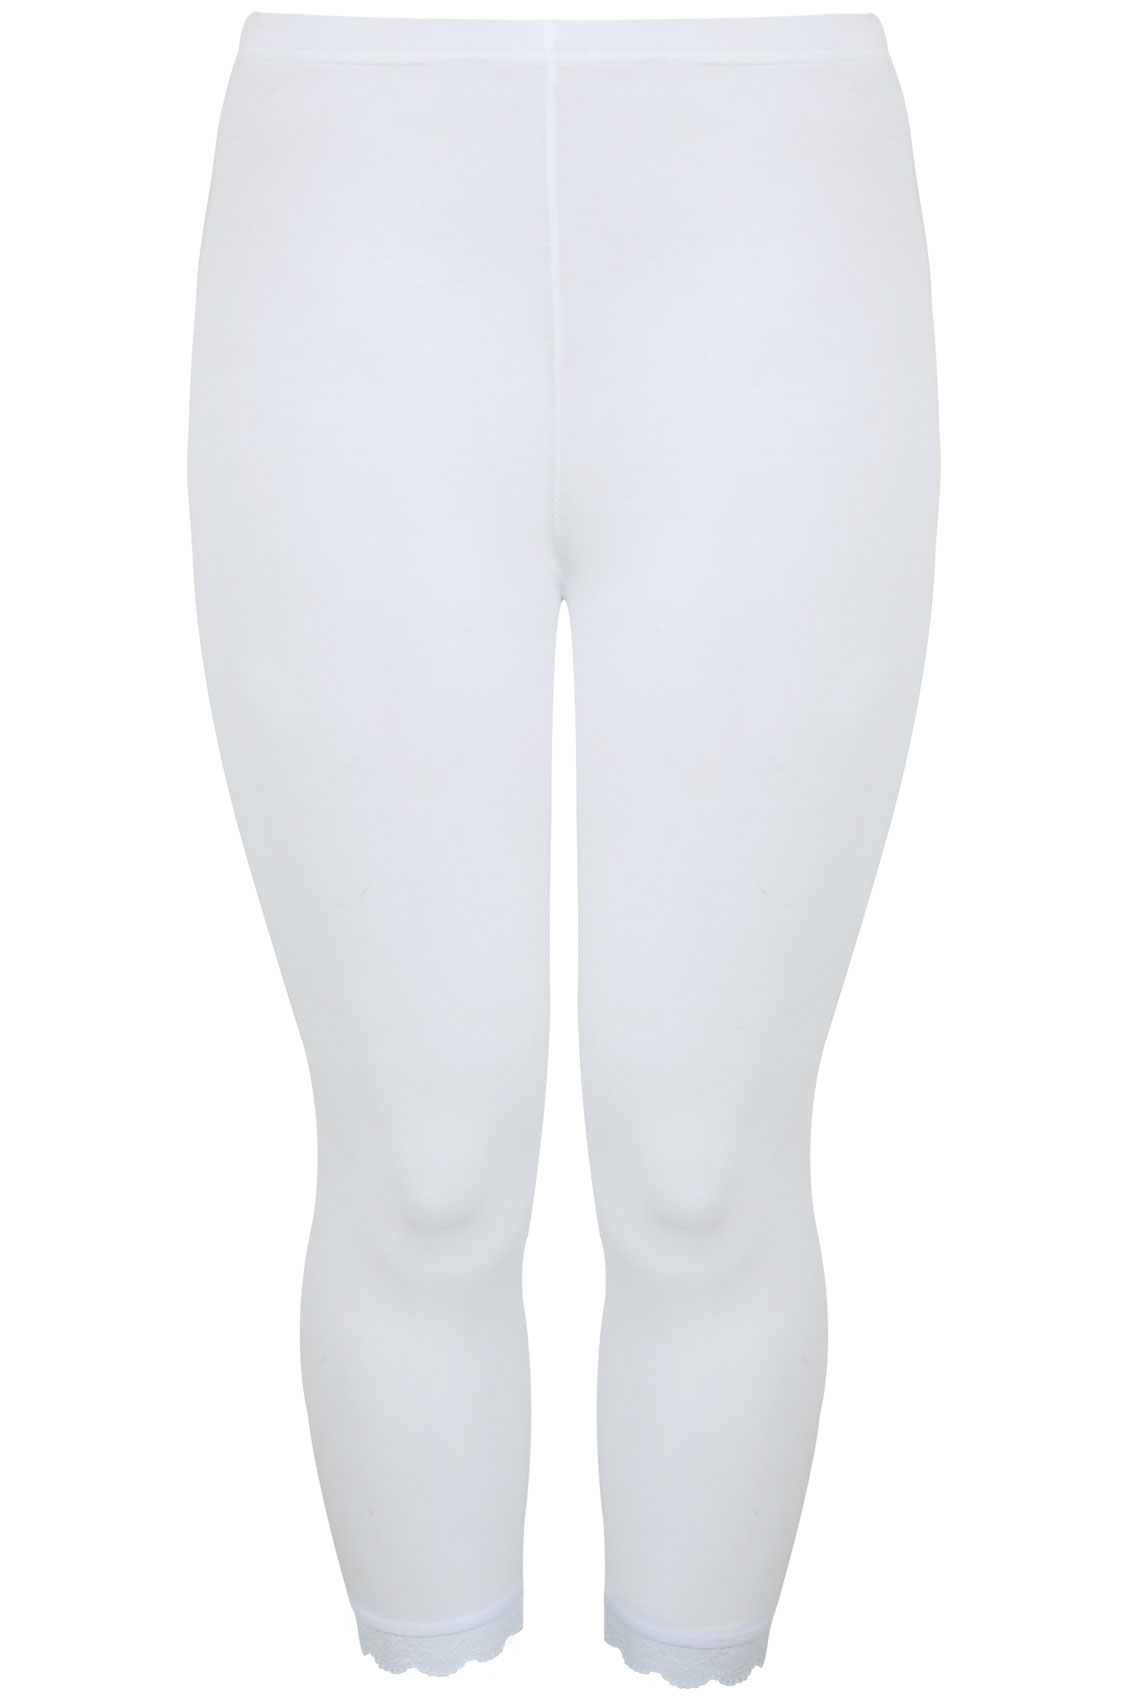 White Cotton Essential Cropped Leggings With Lace Detail Plus Size 16 to 321133 x 1700